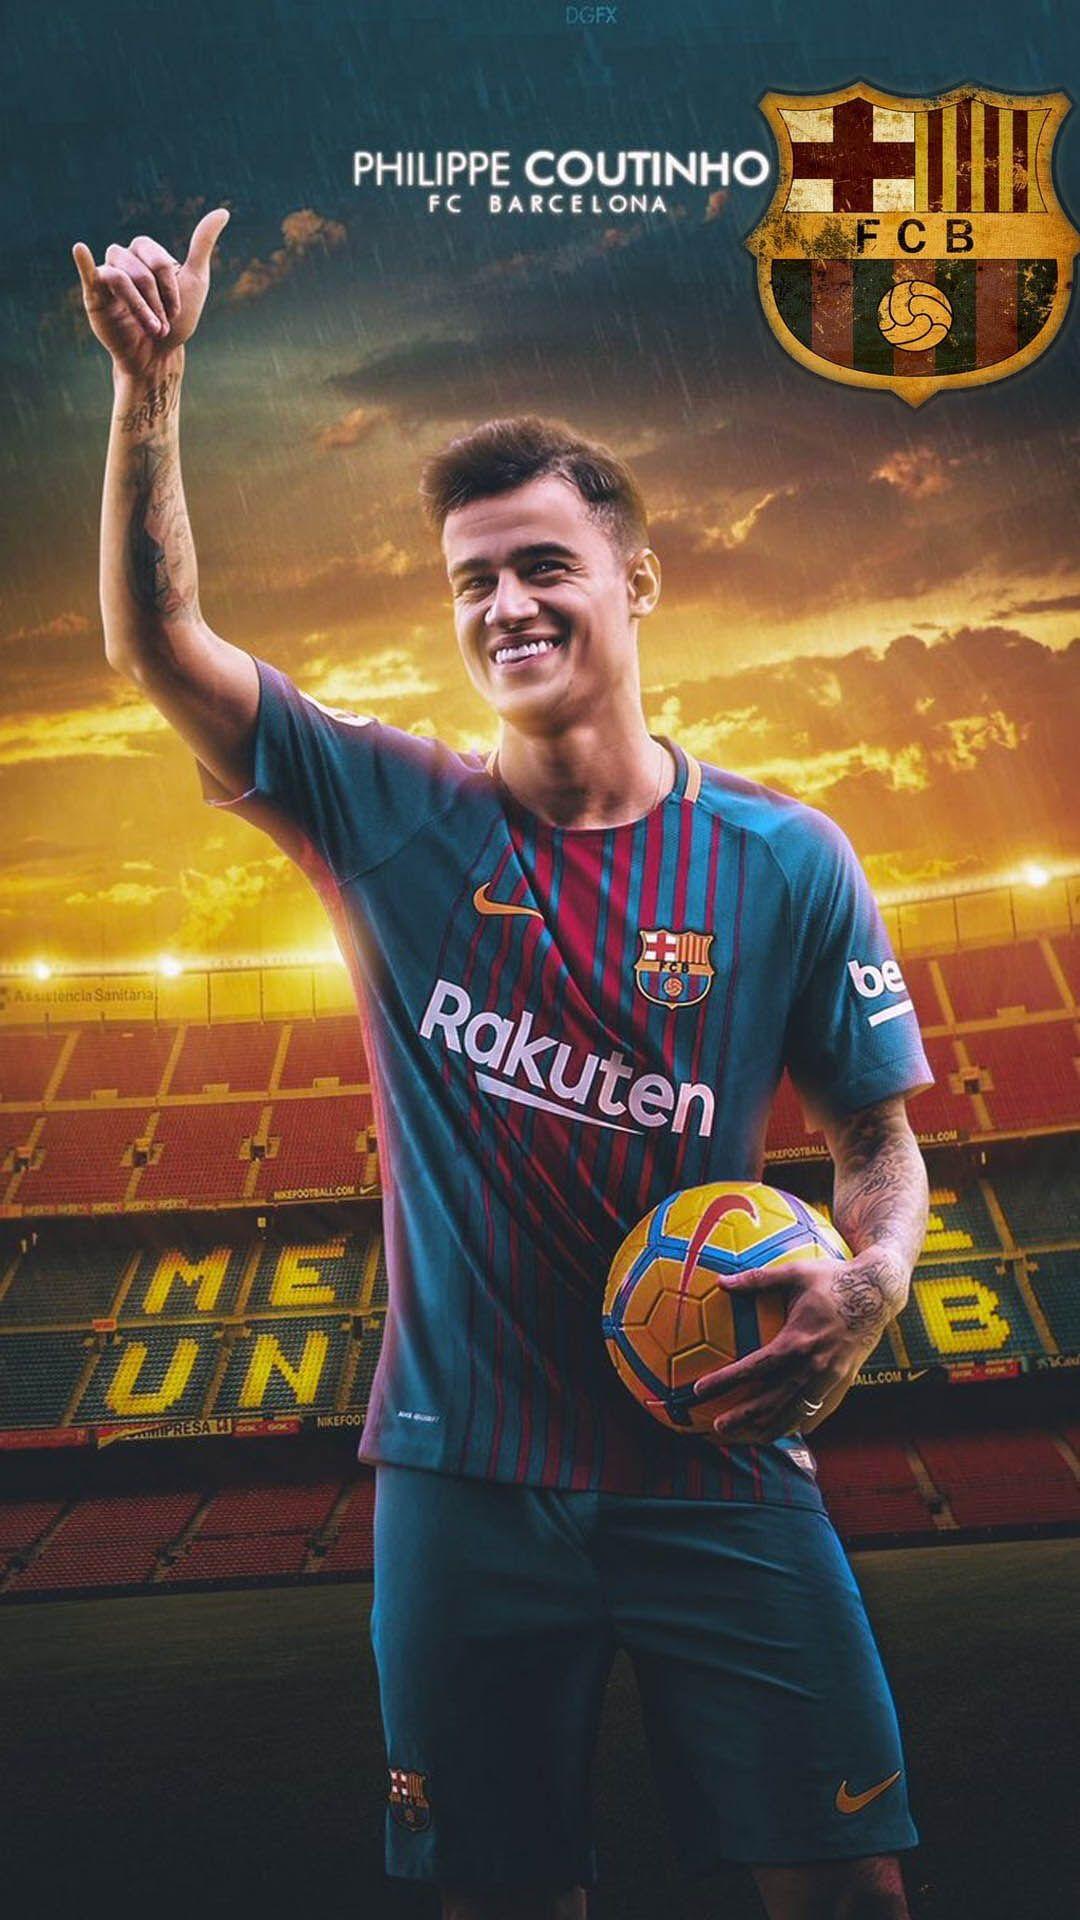 Best Full HD Philippe Coutinho Wallpaper & New Image